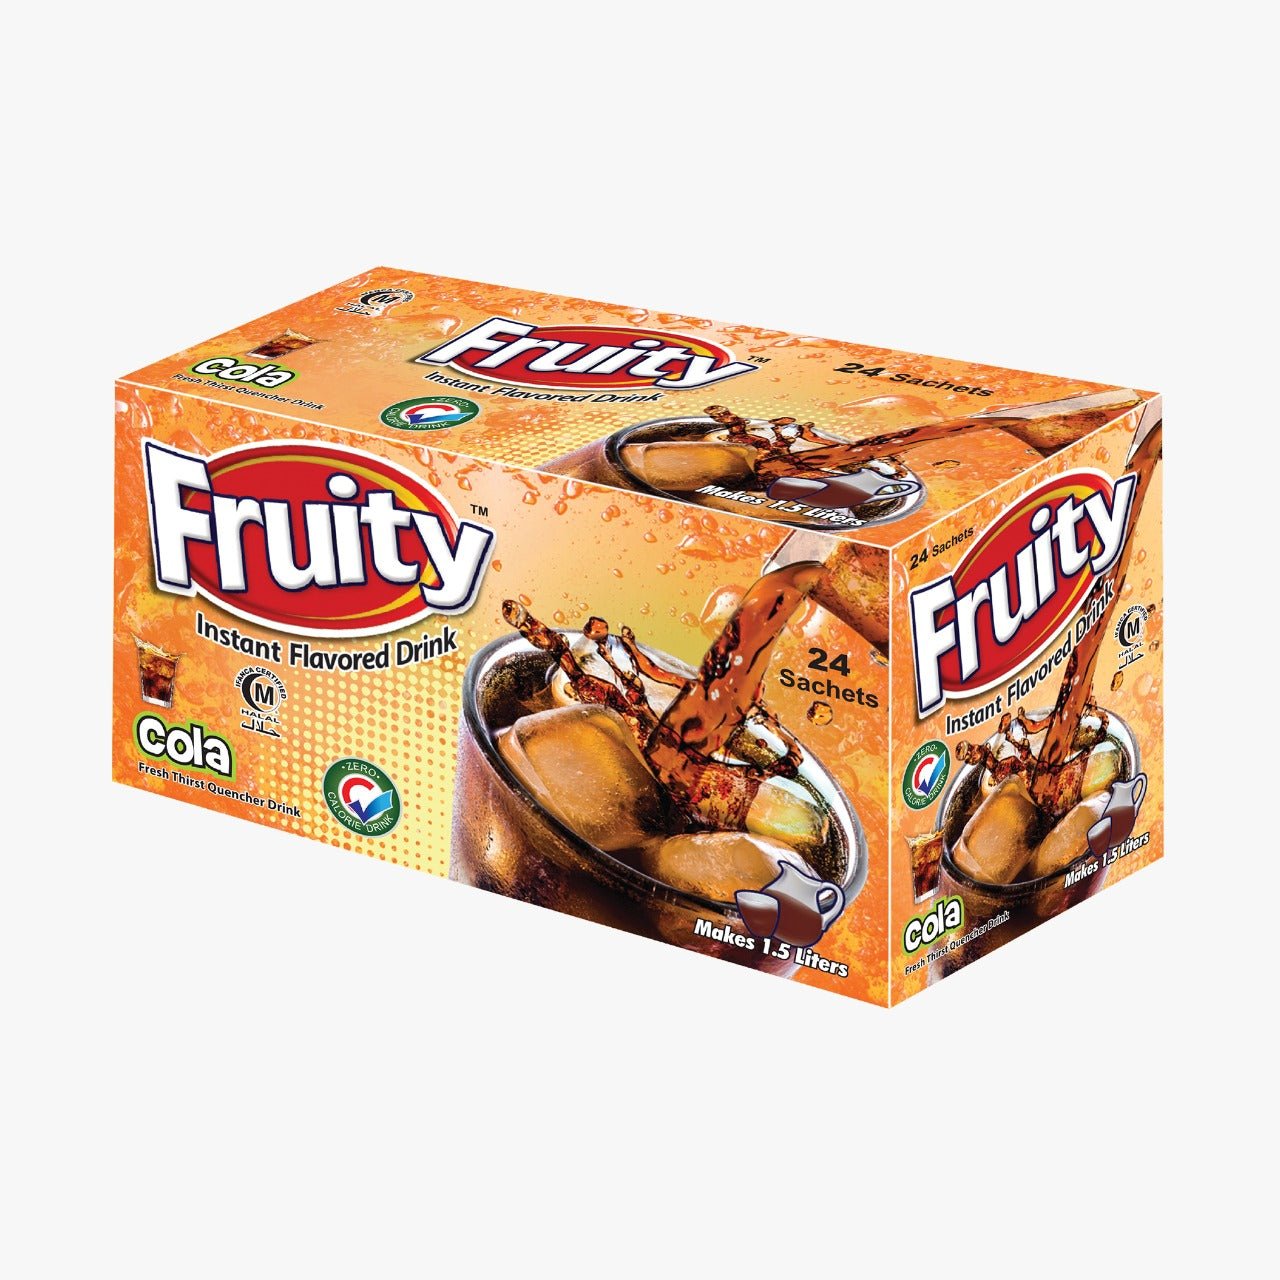 Fruity Instant Drink Cola. Box